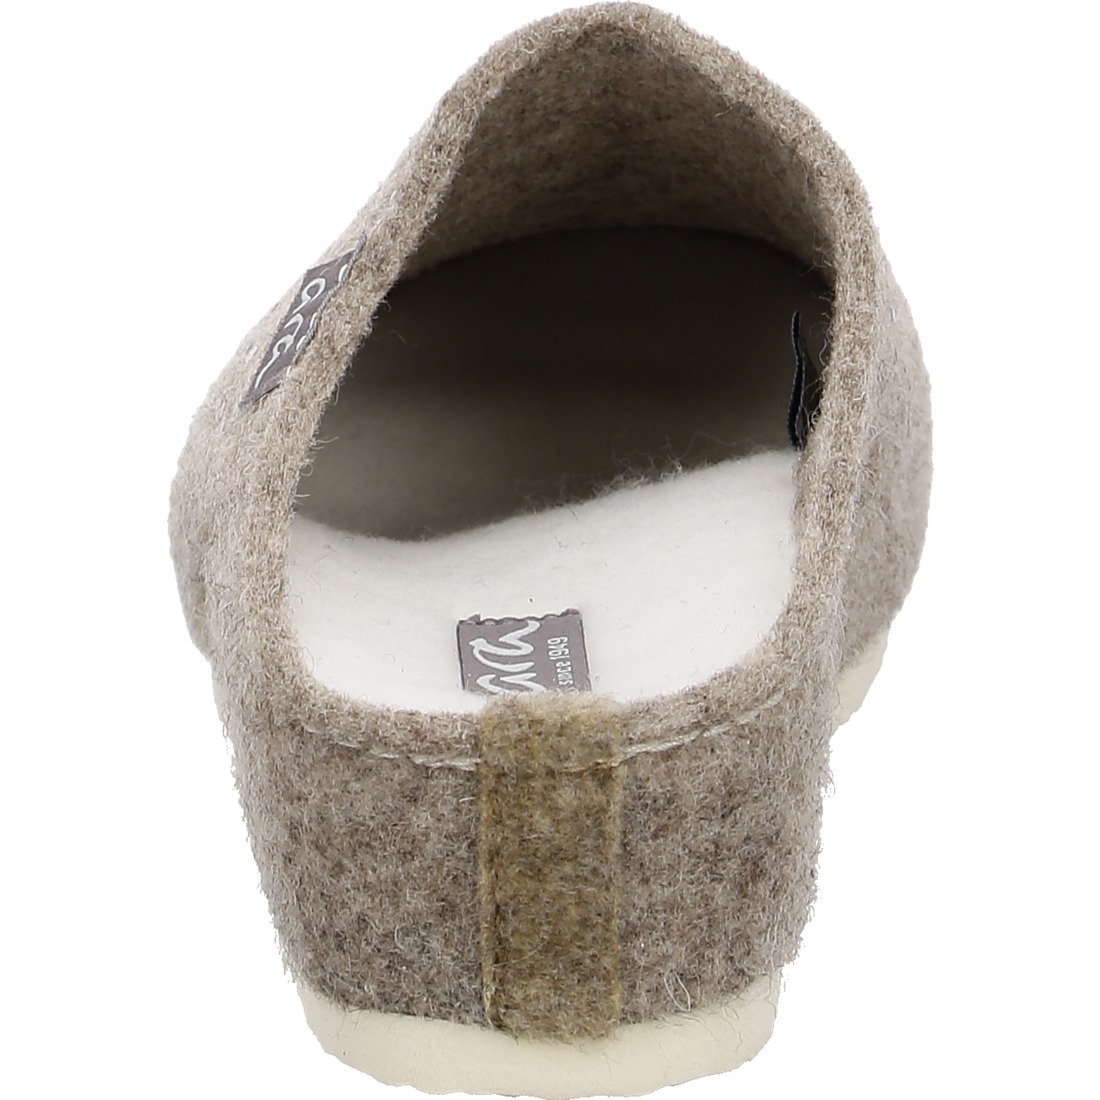 Chaussons*Ara Shoes Chaussons Chaussons Cosy moon